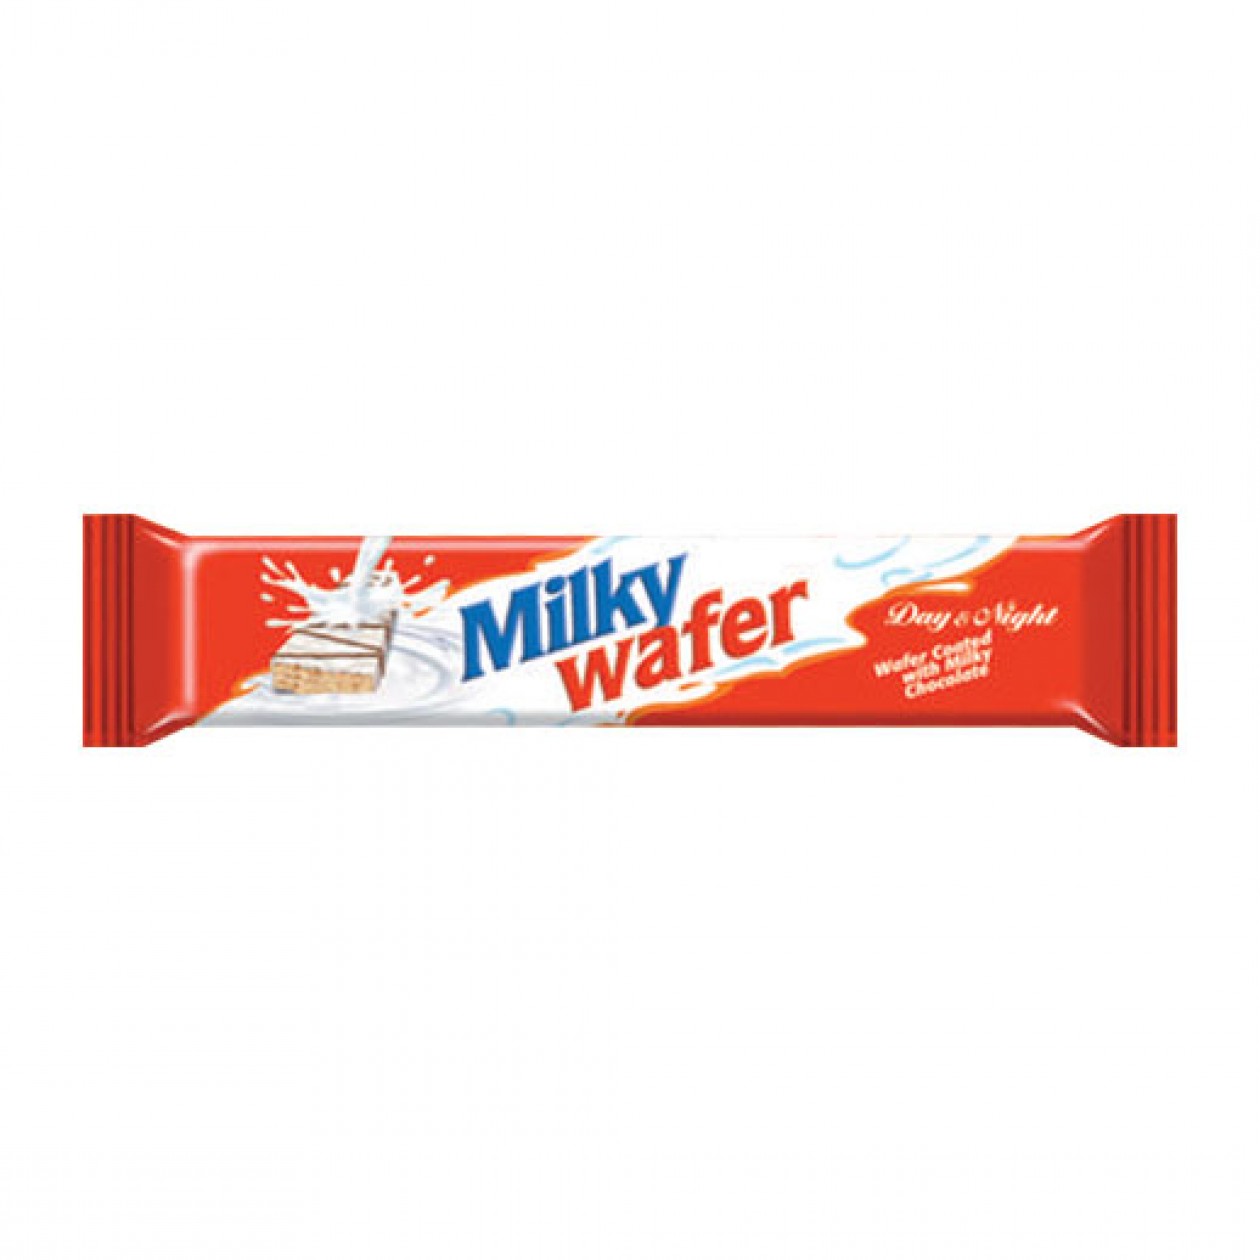 Borovets Wafer Milky Coated 24 x 60g